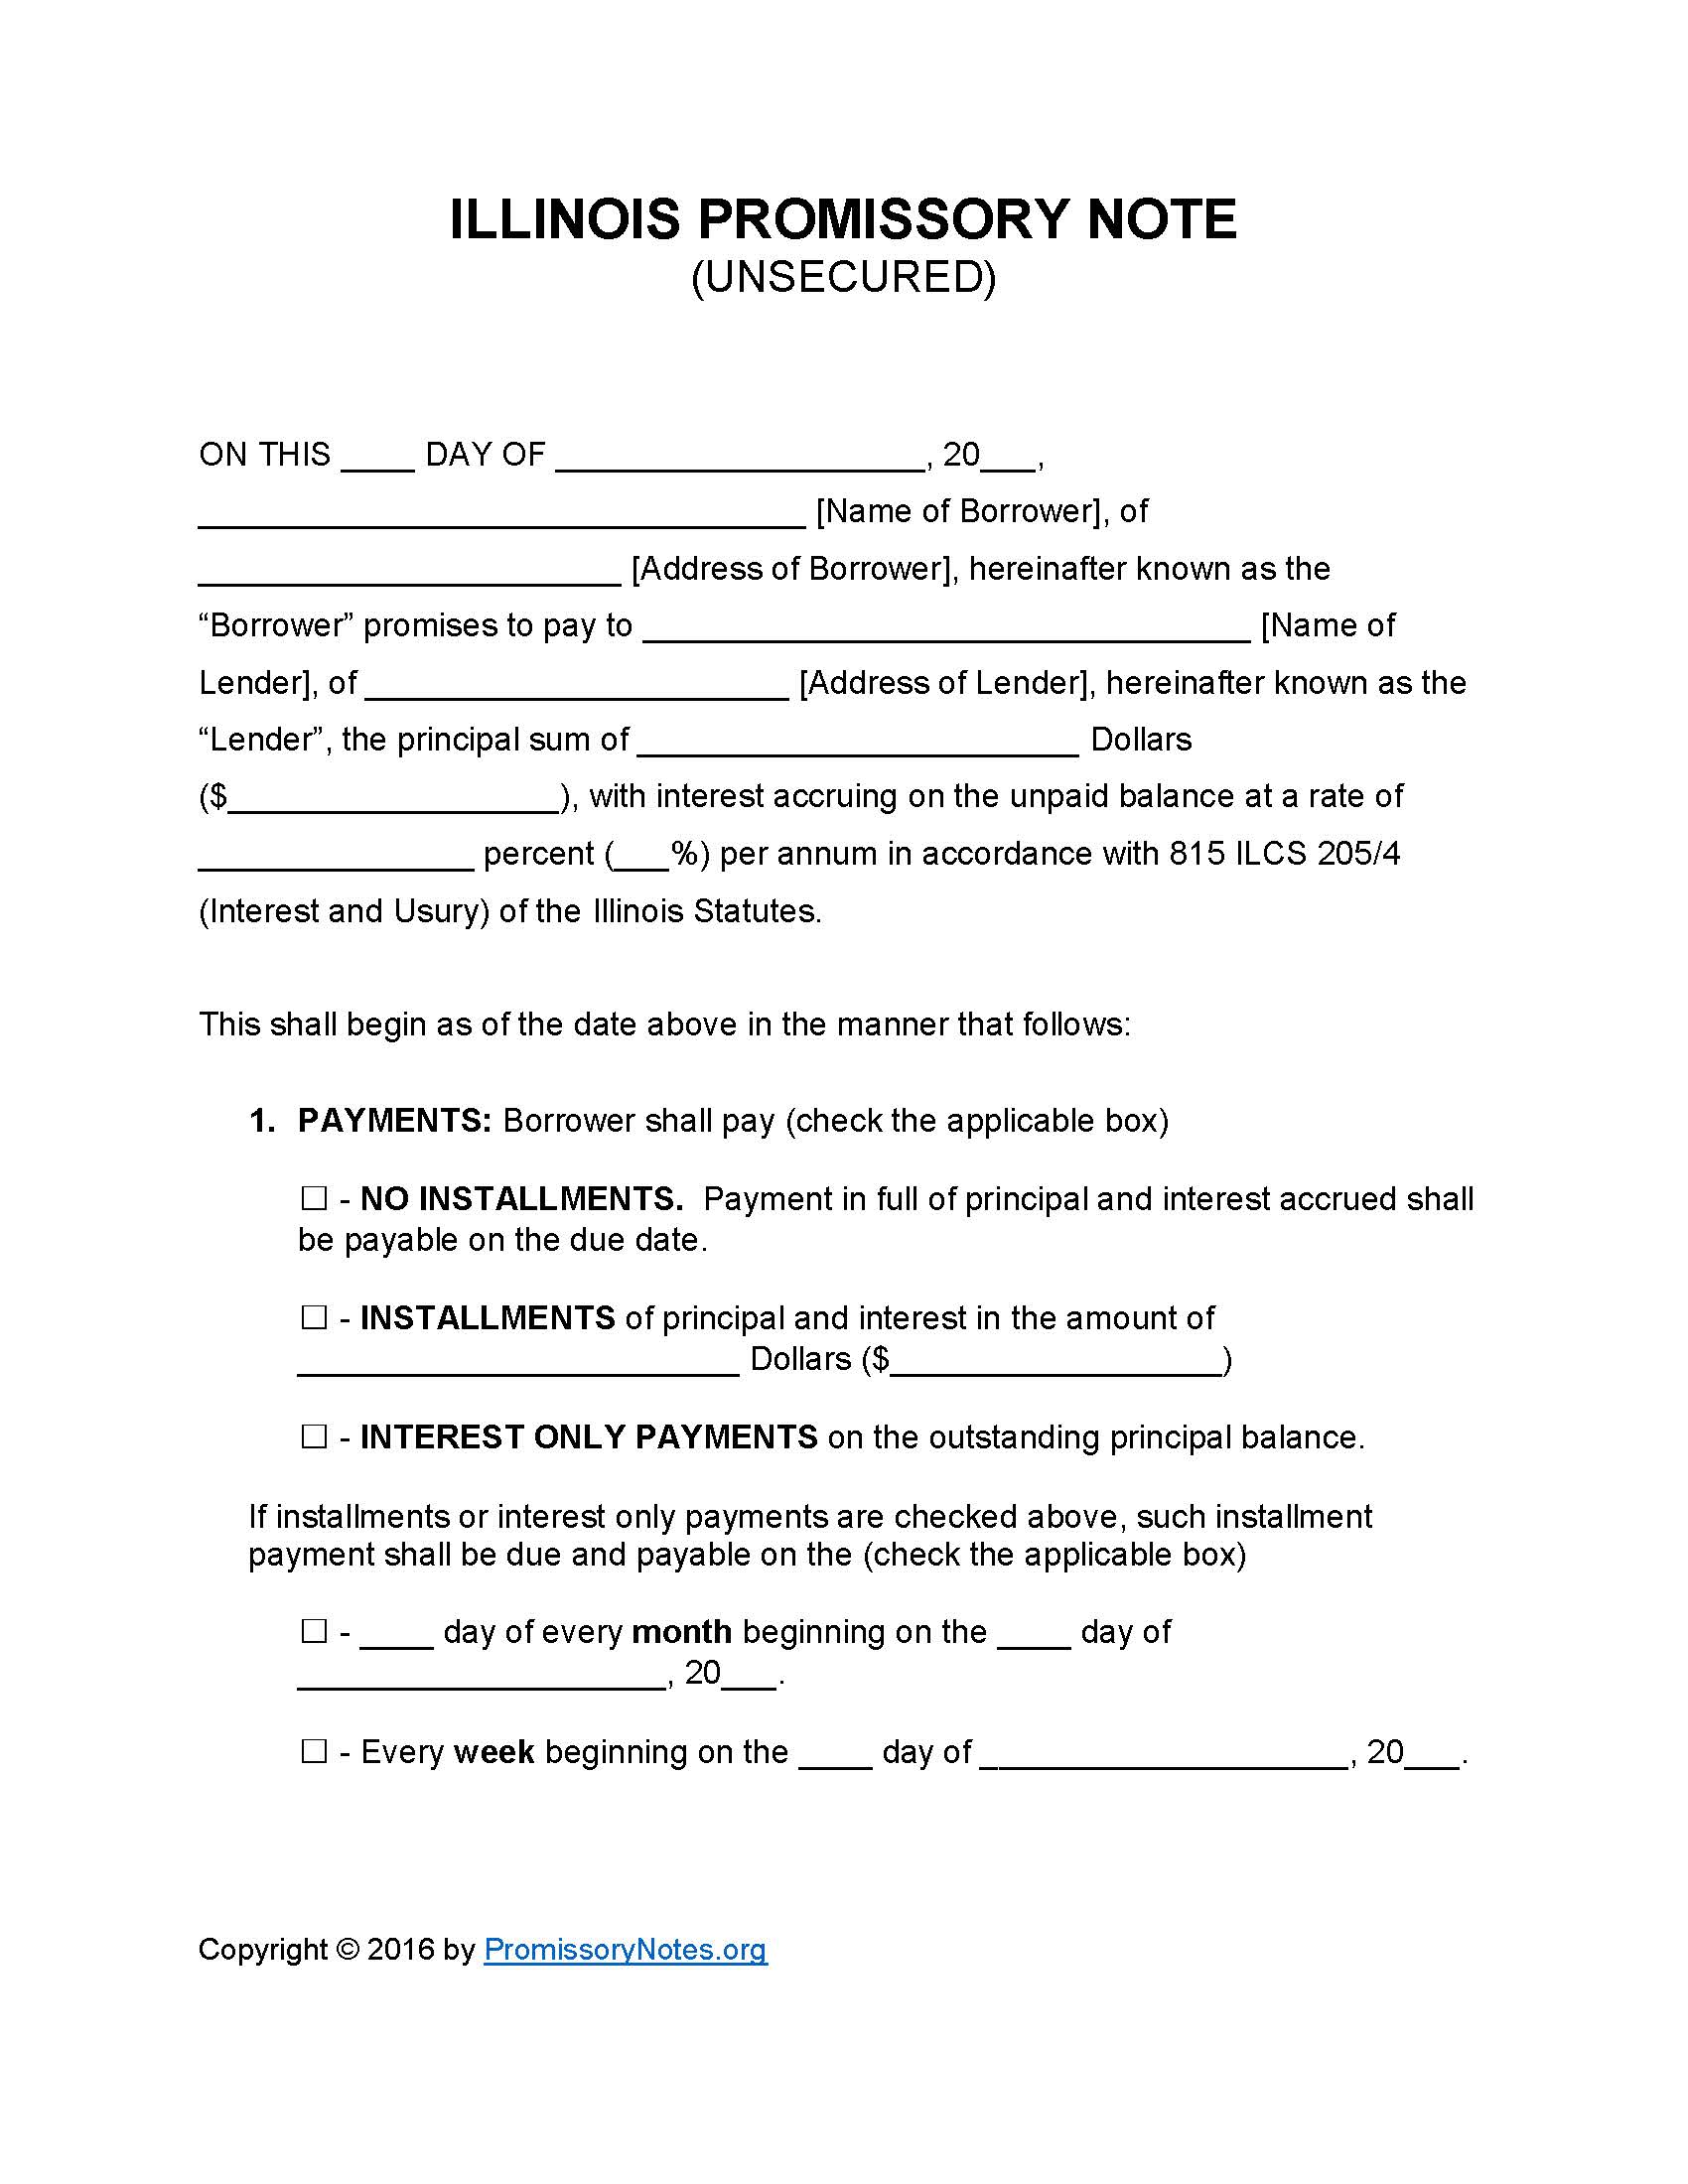 illinois-unsecured-promissory-note-form